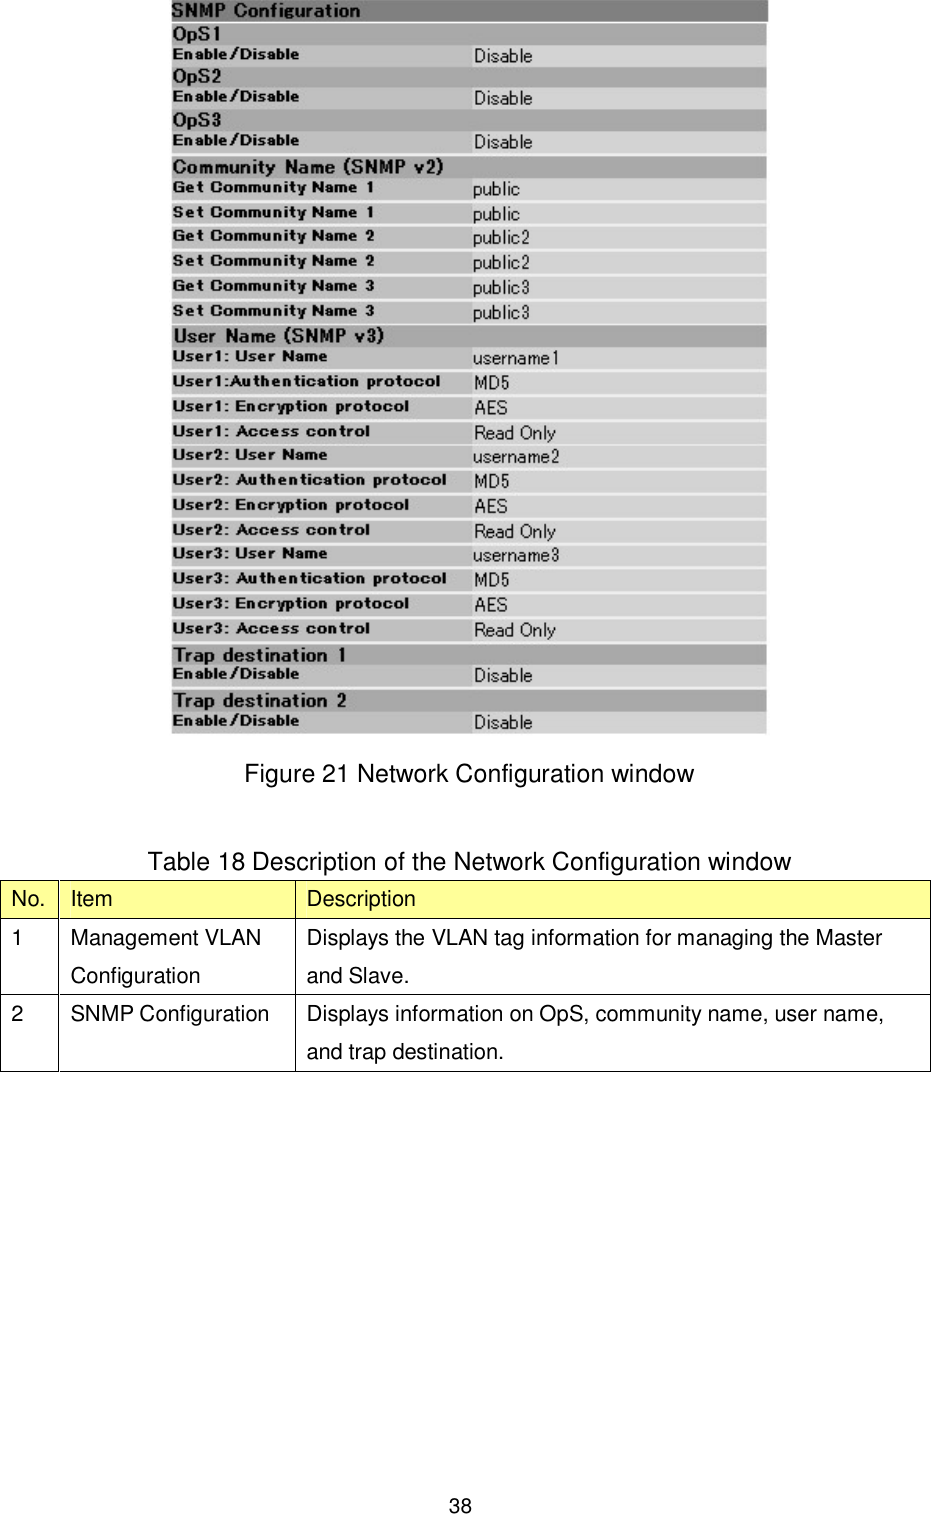    38  Figure 21 Network Configuration window  Table 18 Description of the Network Configuration window No. Item  Description 1  Management VLAN Configuration Displays the VLAN tag information for managing the Master and Slave. 2  SNMP Configuration  Displays information on OpS, community name, user name, and trap destination.  